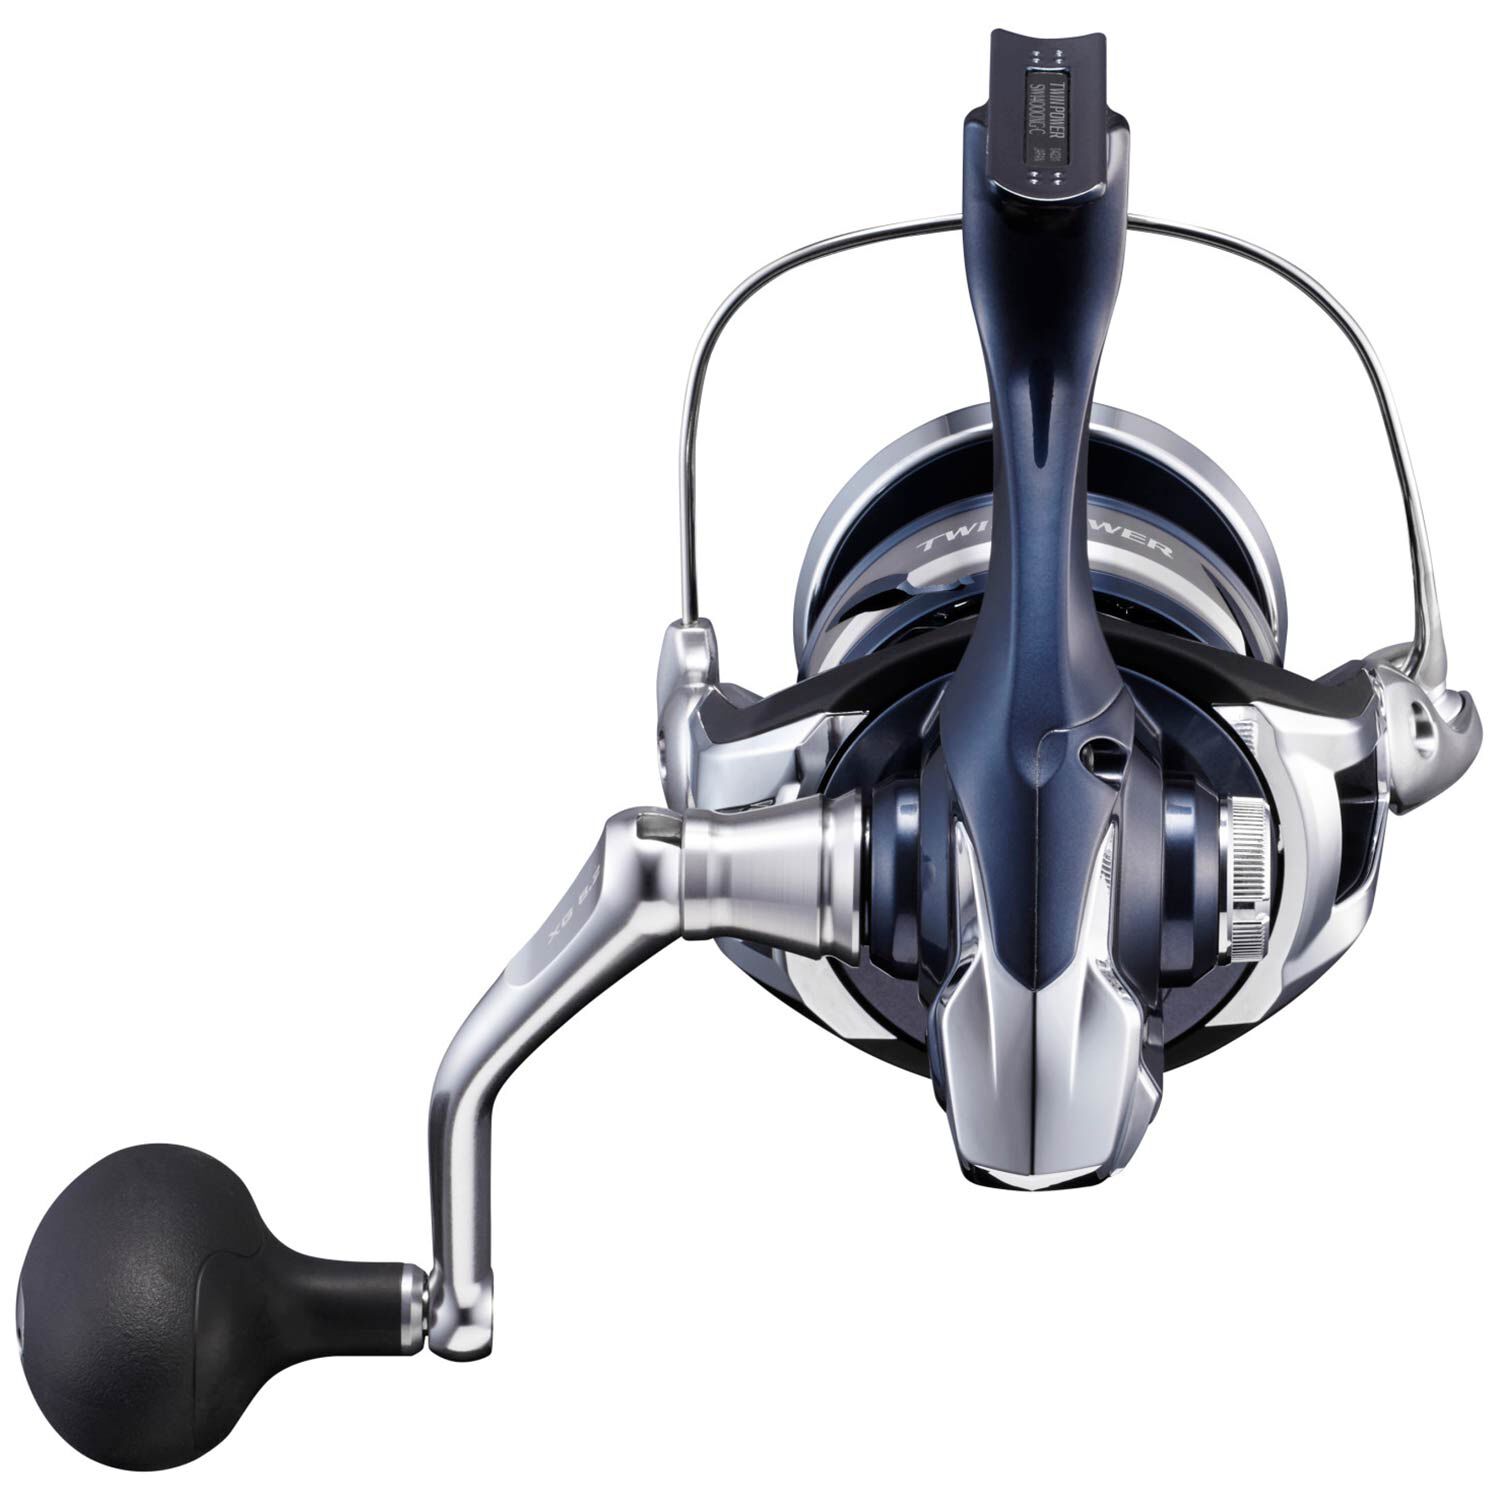 Twinpower SW 8000HG C Spinning Reel